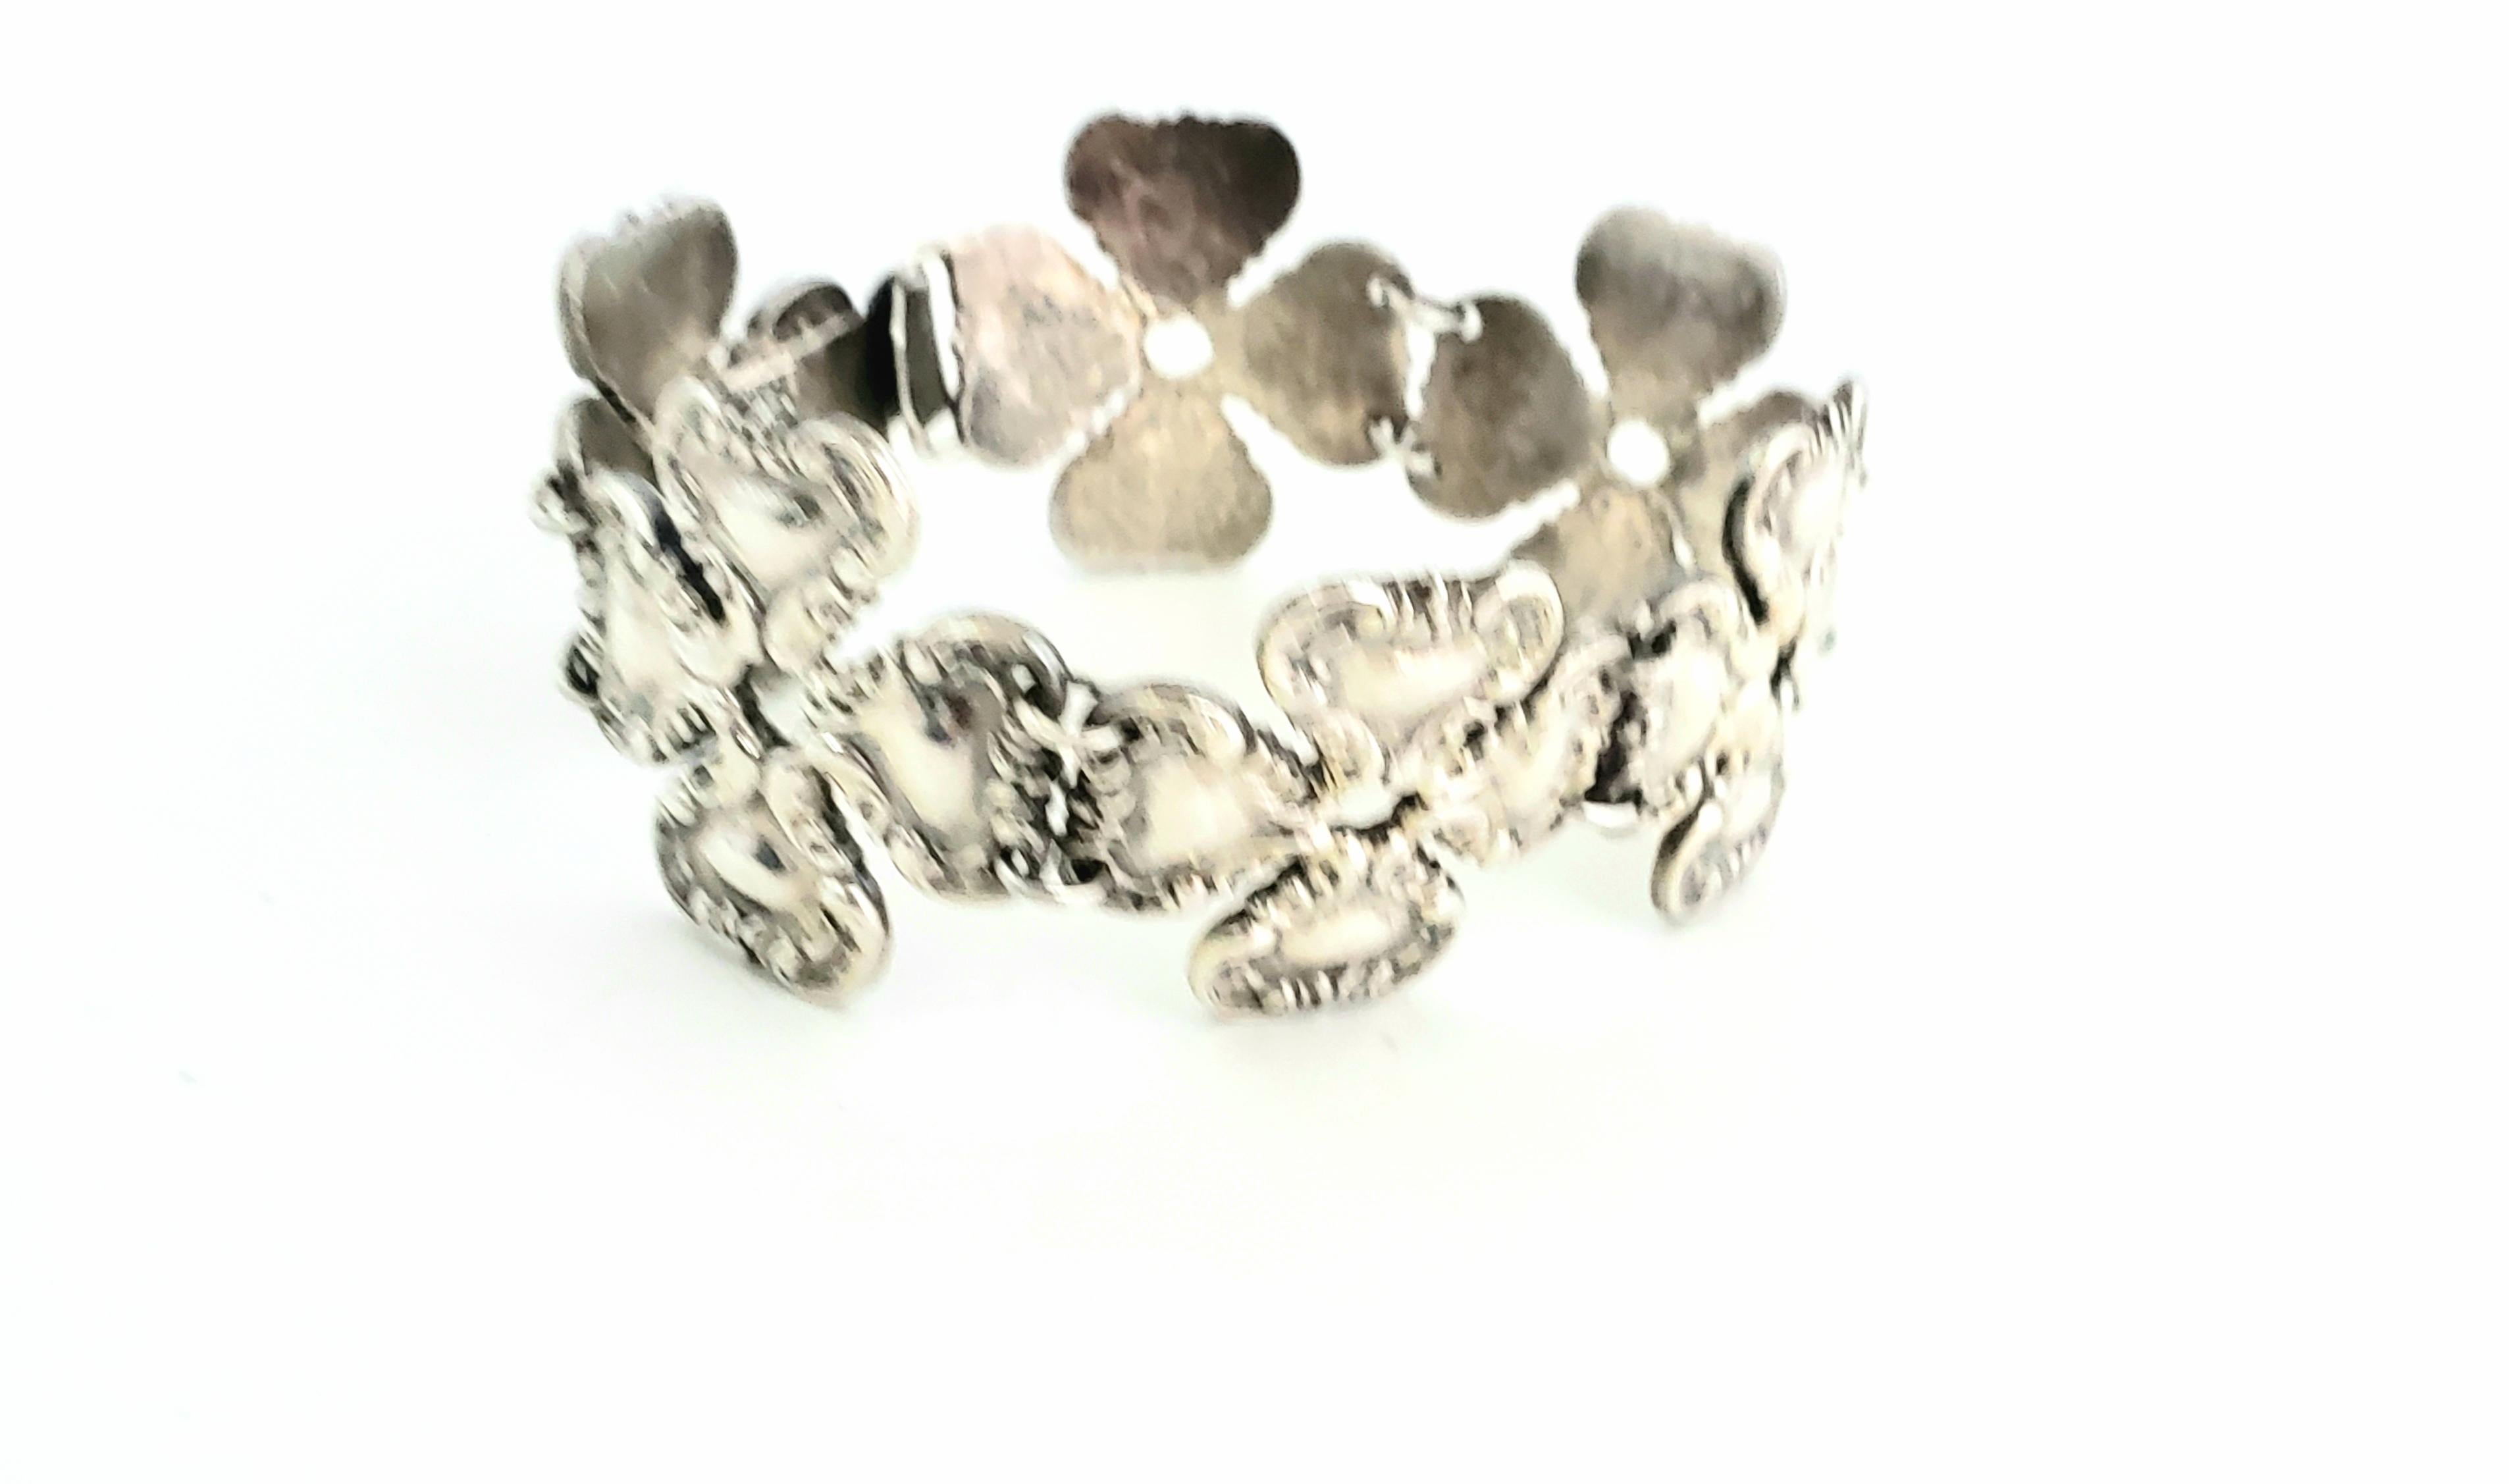 Rubens Mexico Sterling Silver Four Leaf Clover Link Bracelet

This is a gorgeous Mexican designer piece. Featured is a sterling silver four leaf clover bracelet by Rubens Mexico. 

Bracelet is made up of 6 Shell/Flower shaped links. 

c. 1940s,